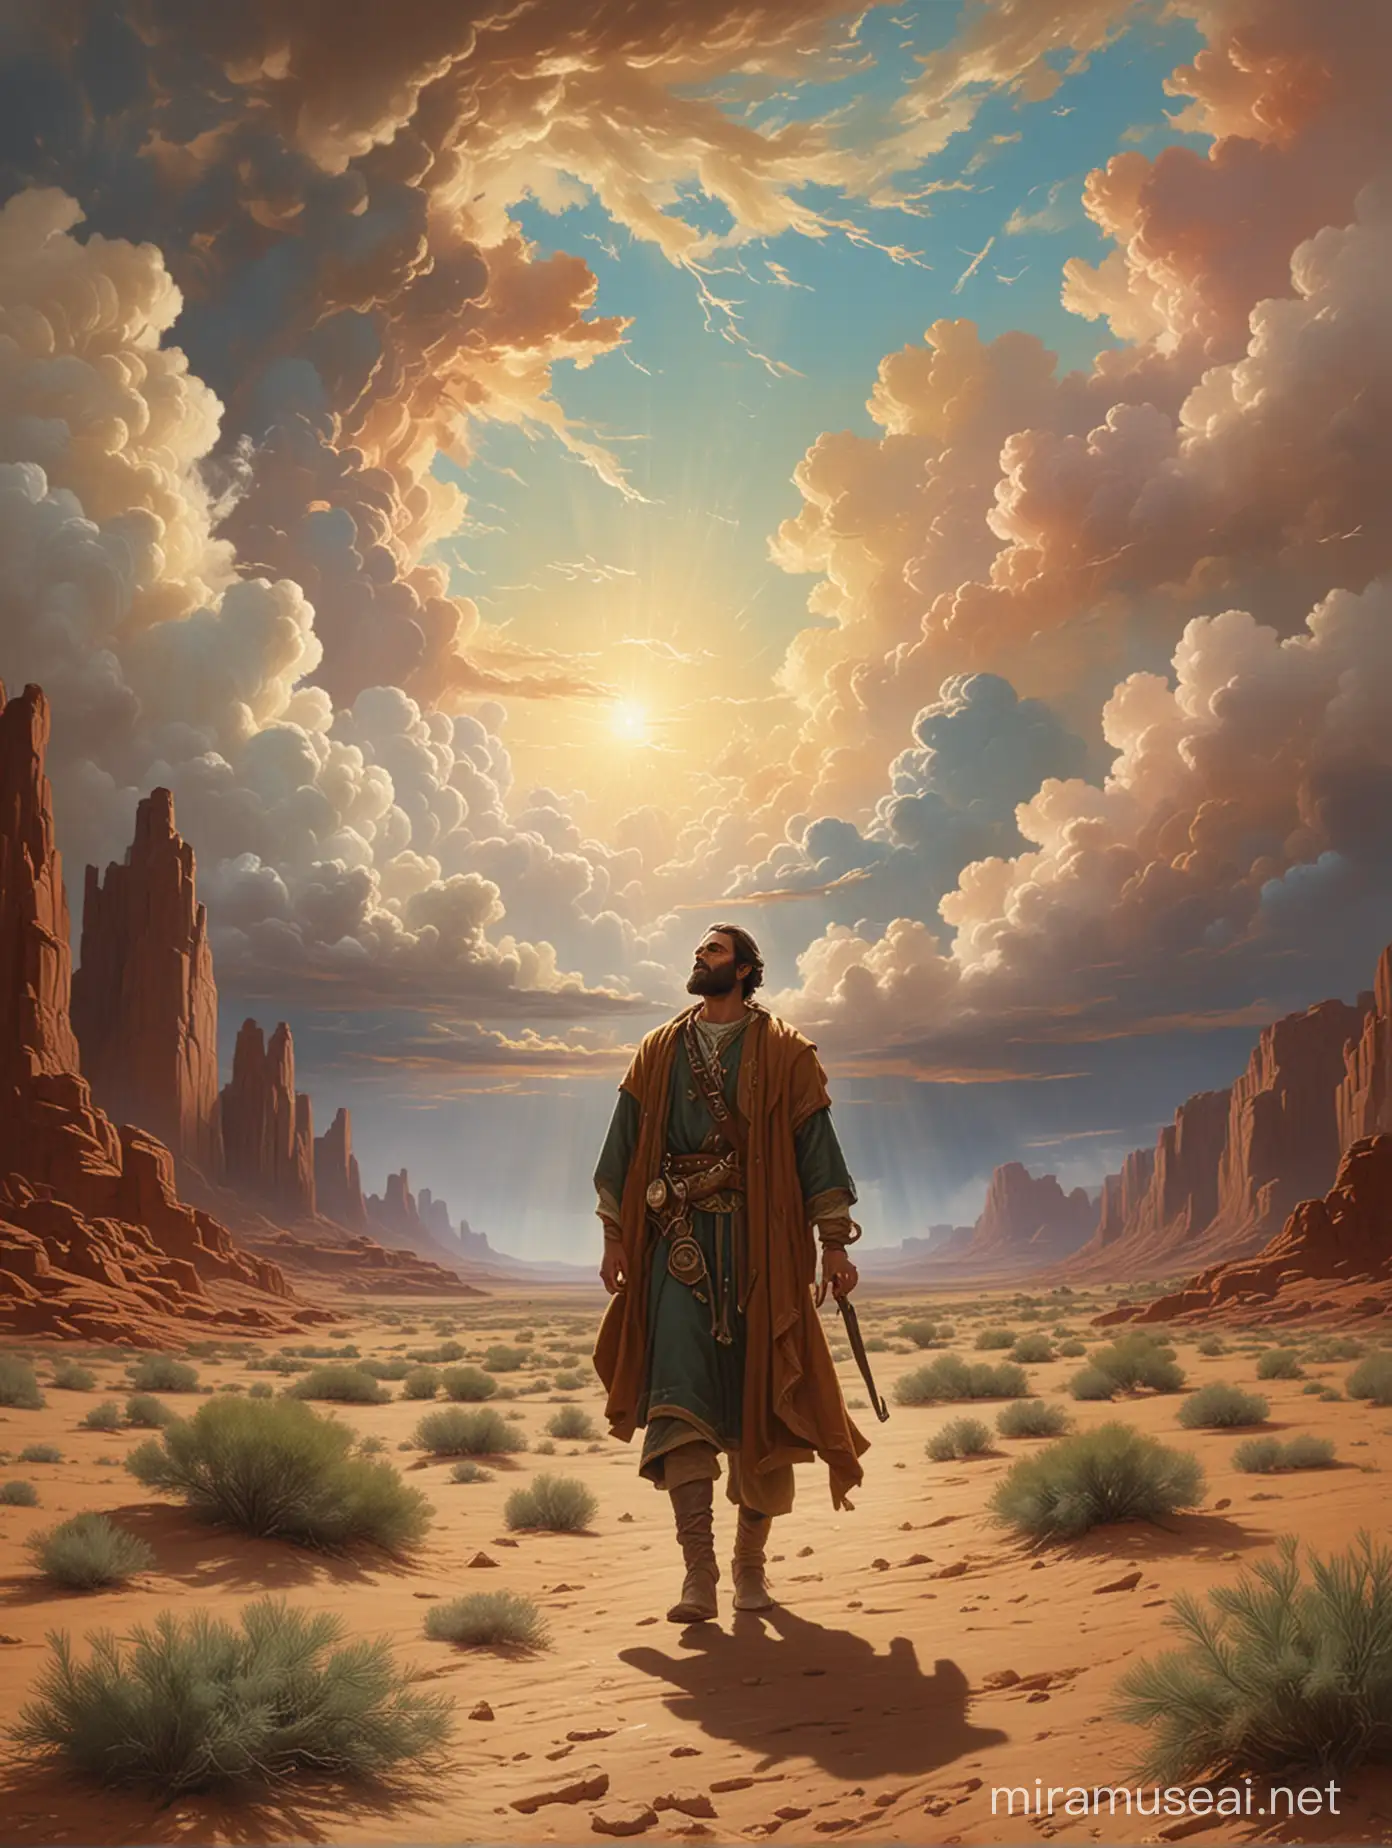 Highly detailed painting based closely on ((("Elijah in the Desert" by Washington Allston))), focus on the clouds in the sky, use muted pastel colors only, high quality